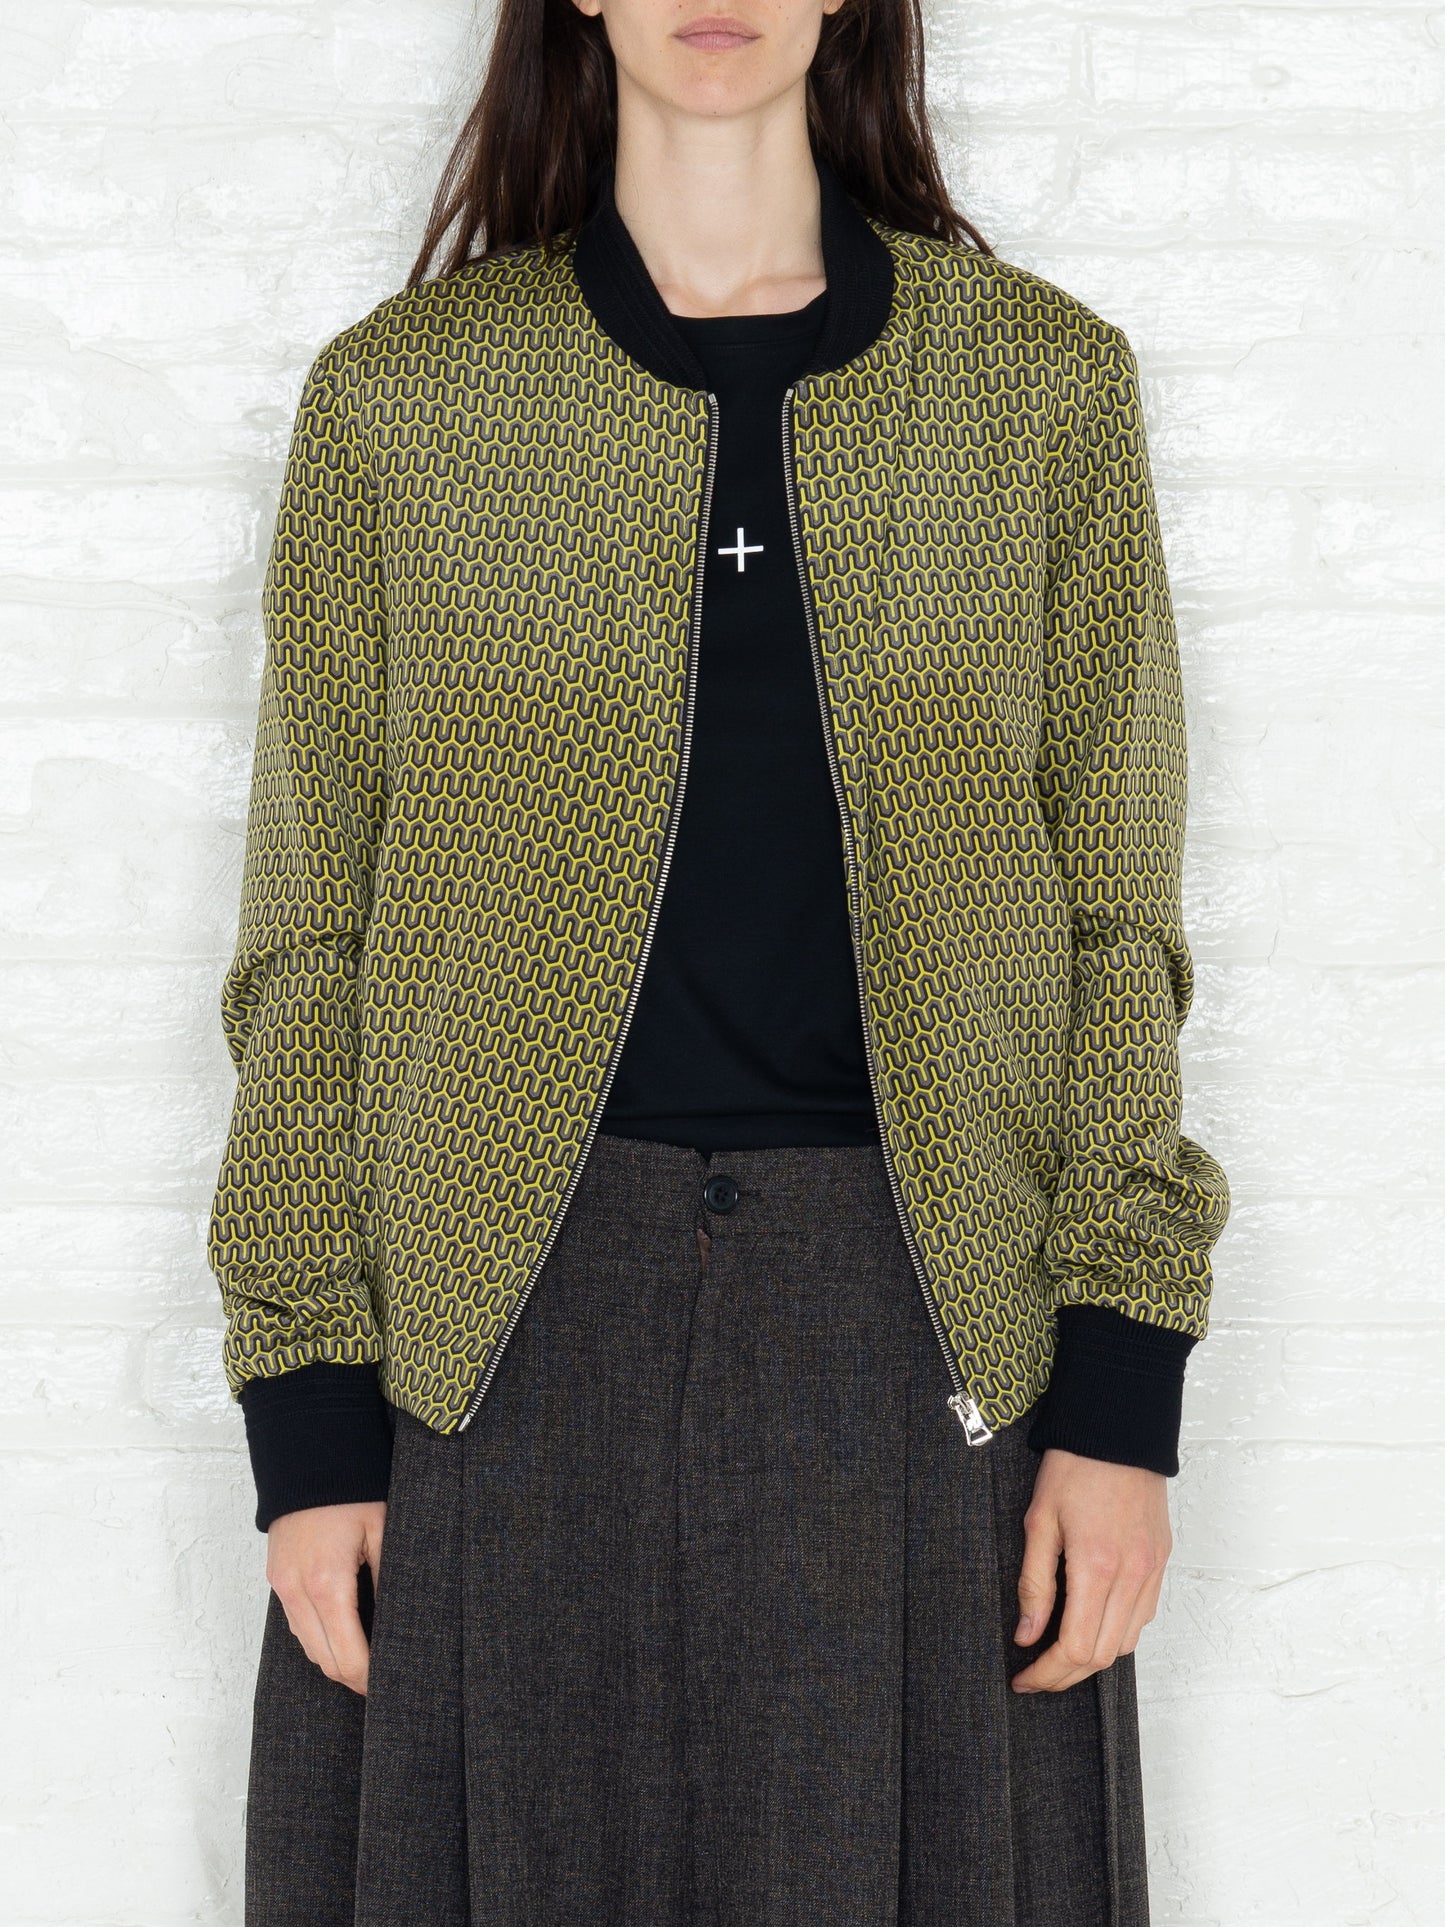 "The Classic Bomber" in a Green Patterned Print